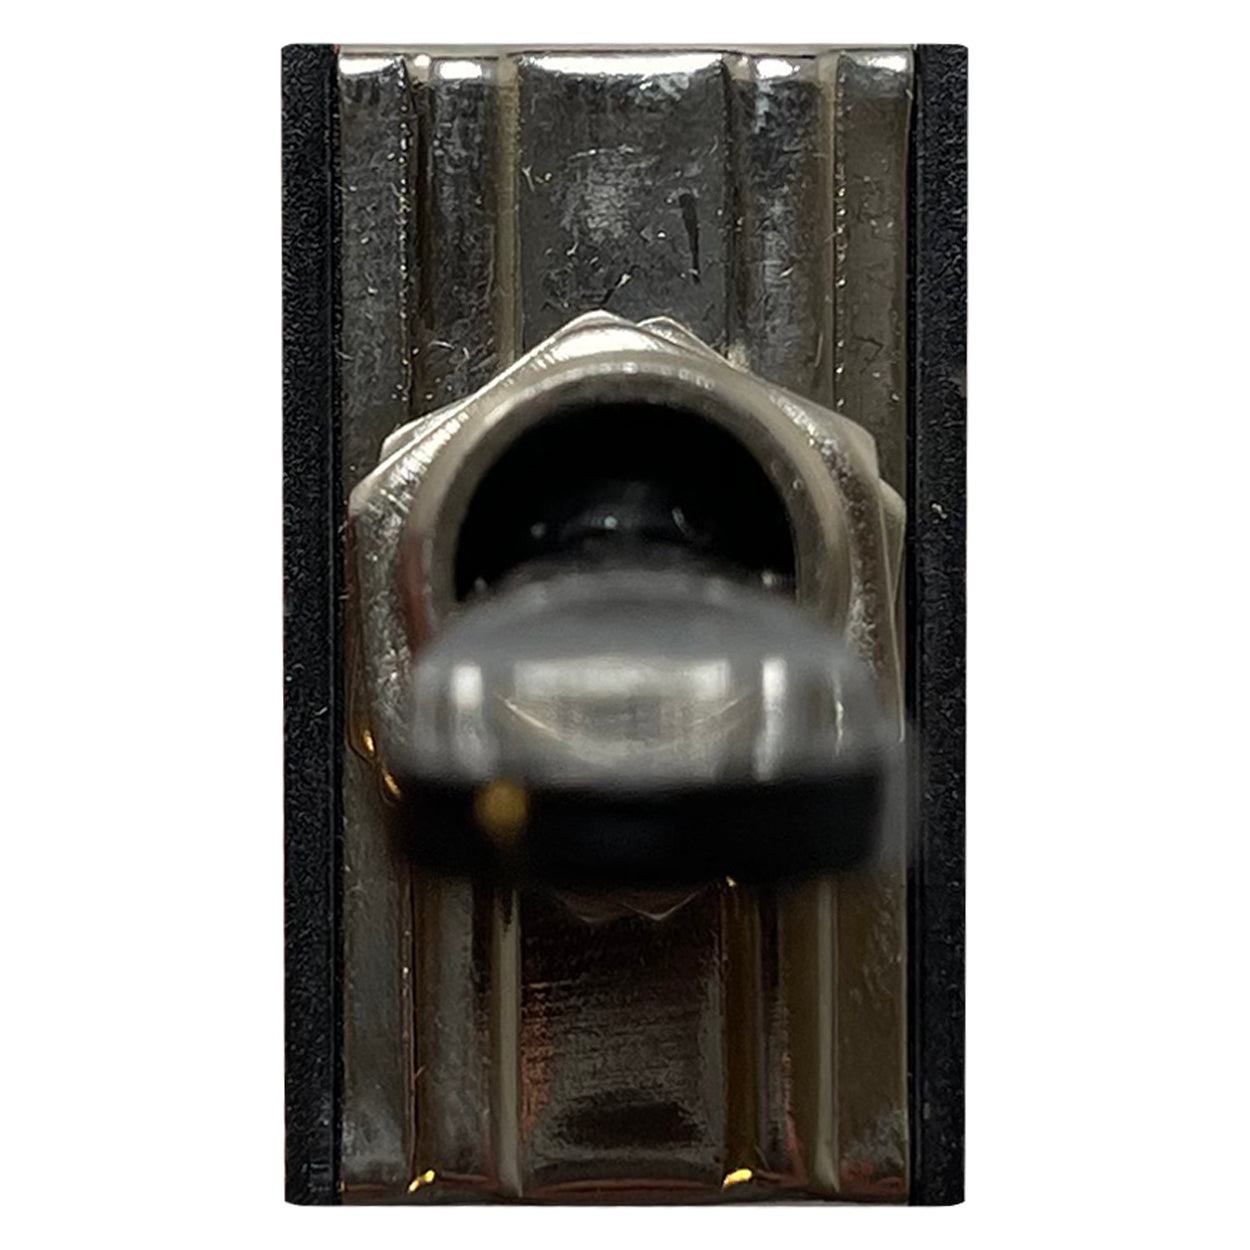 Heavy Duty Momentary MOM On / On / Off Metal Toggle Switch - 20 Amps @ 12 Volts